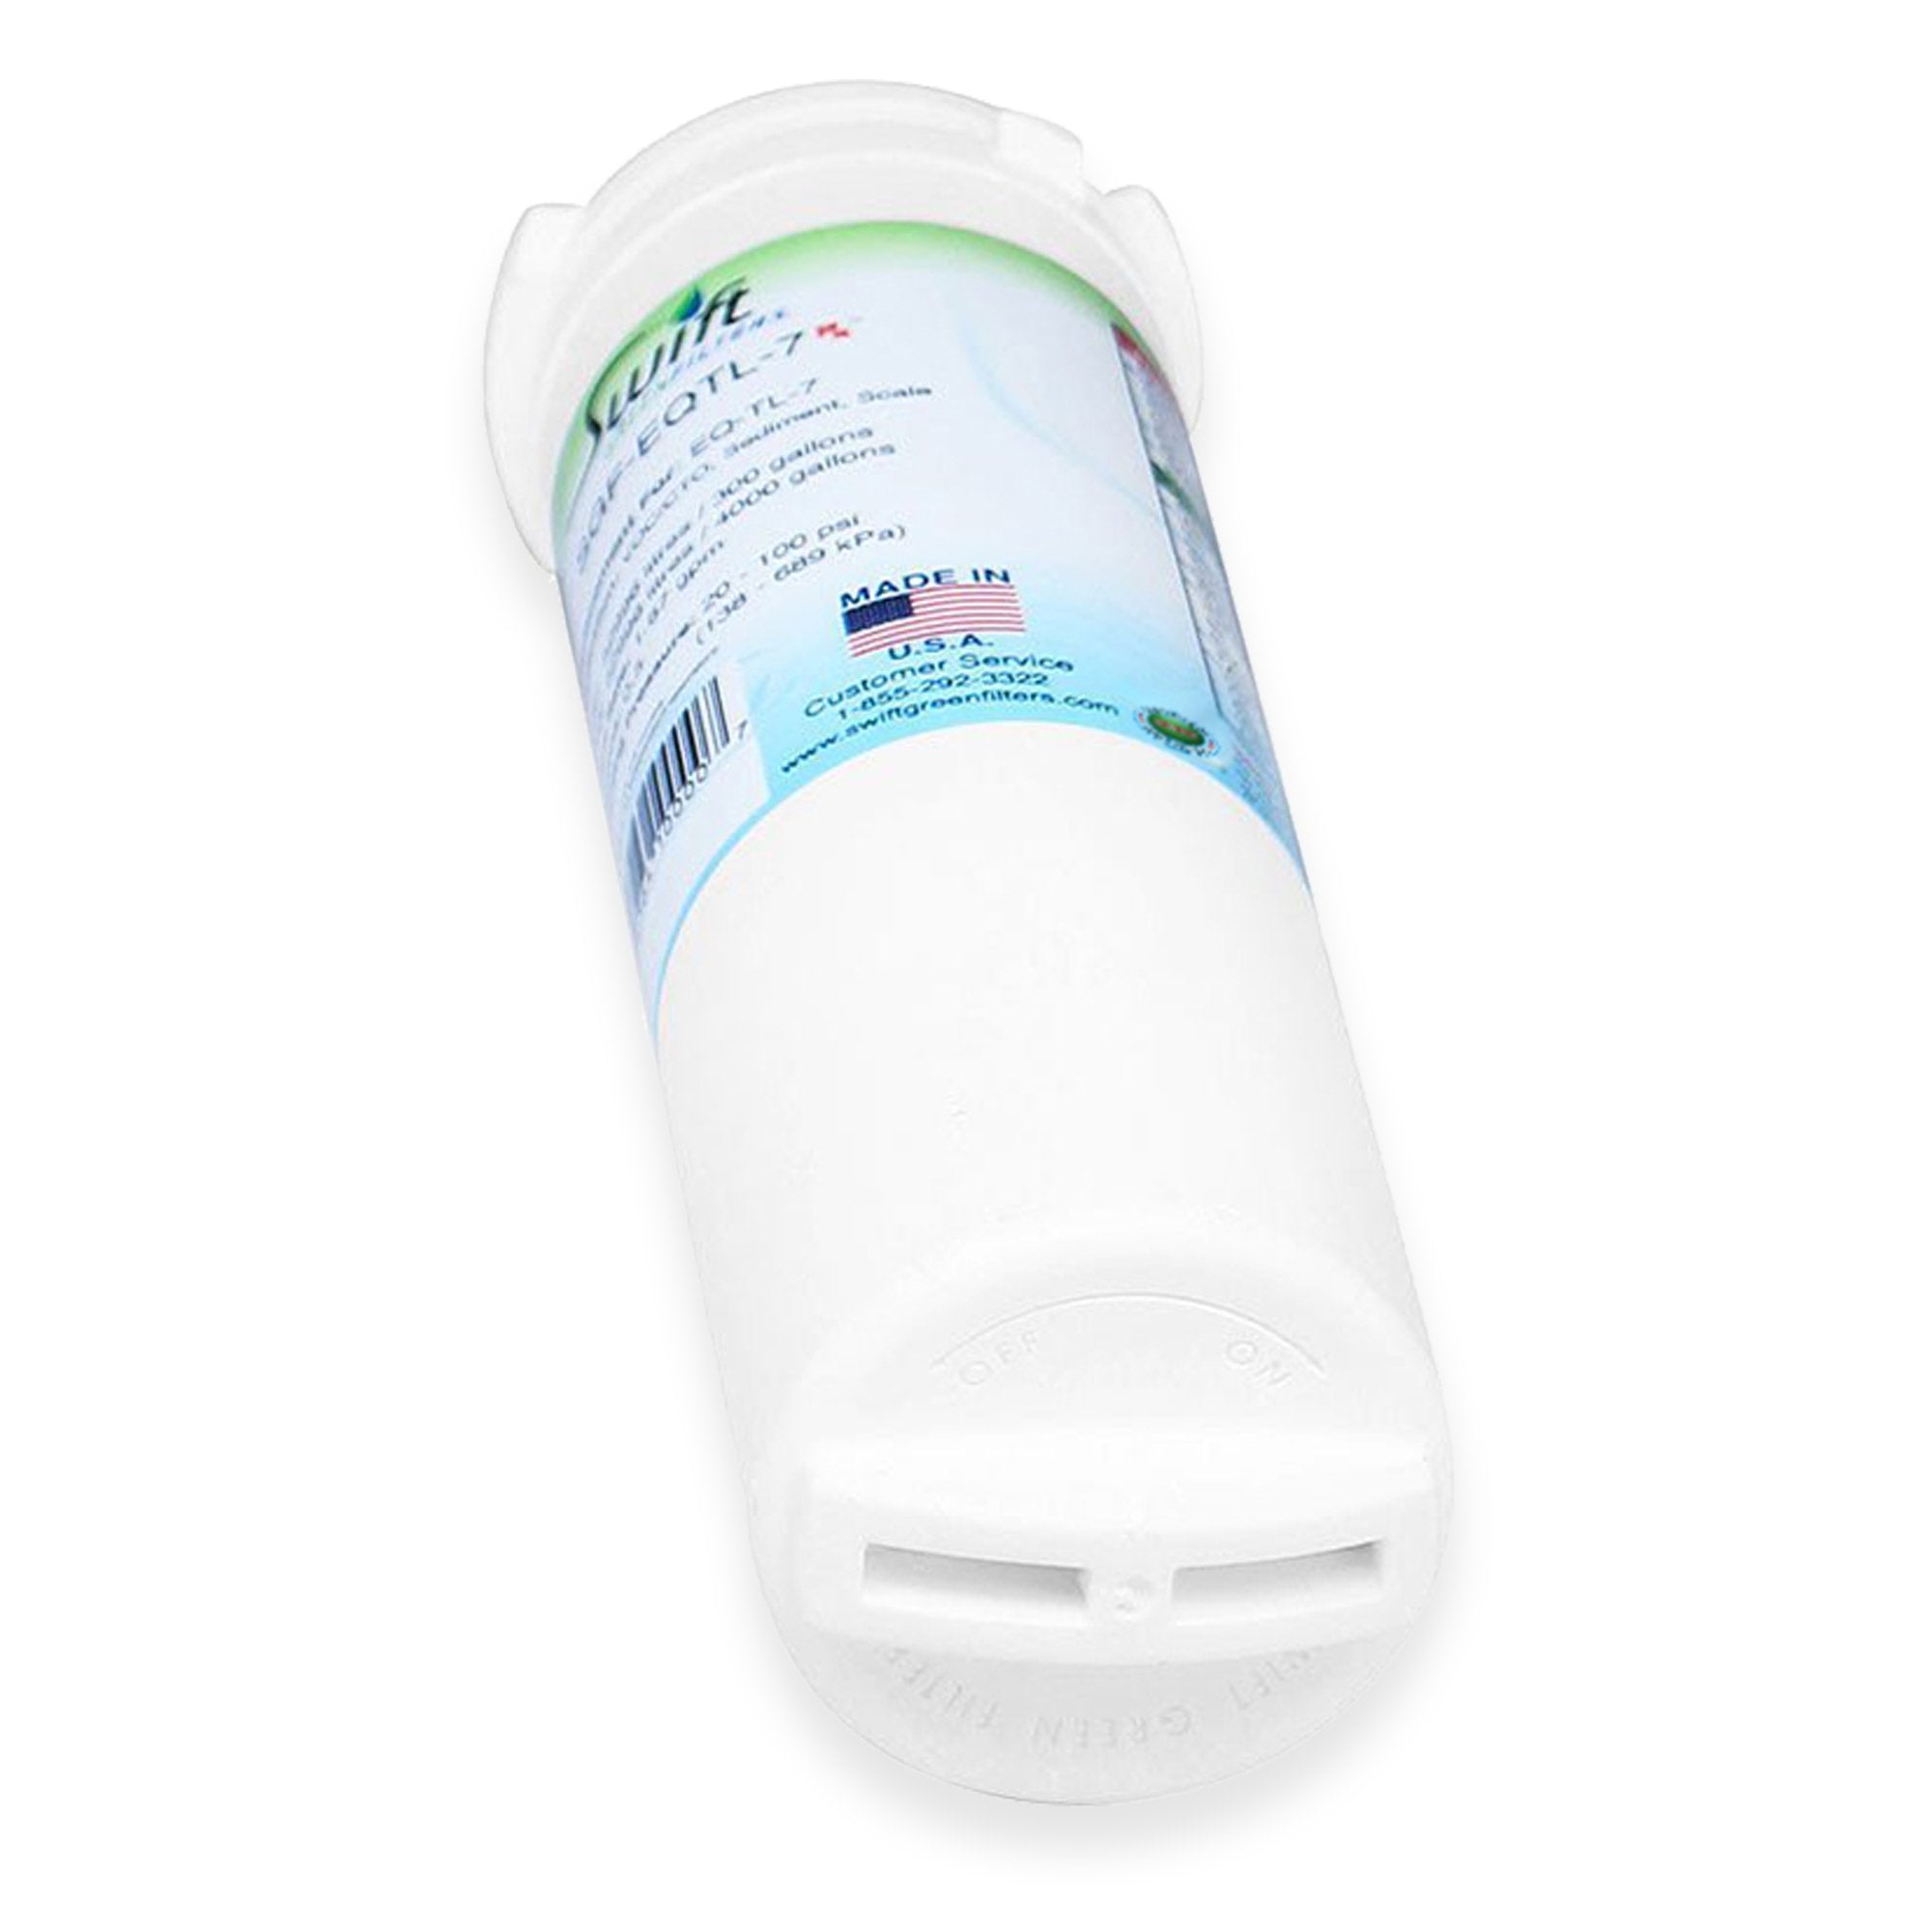 Replacement for Bunn EQTL-7 Water Filter by Swift Green Filters SGF-EQTL-7